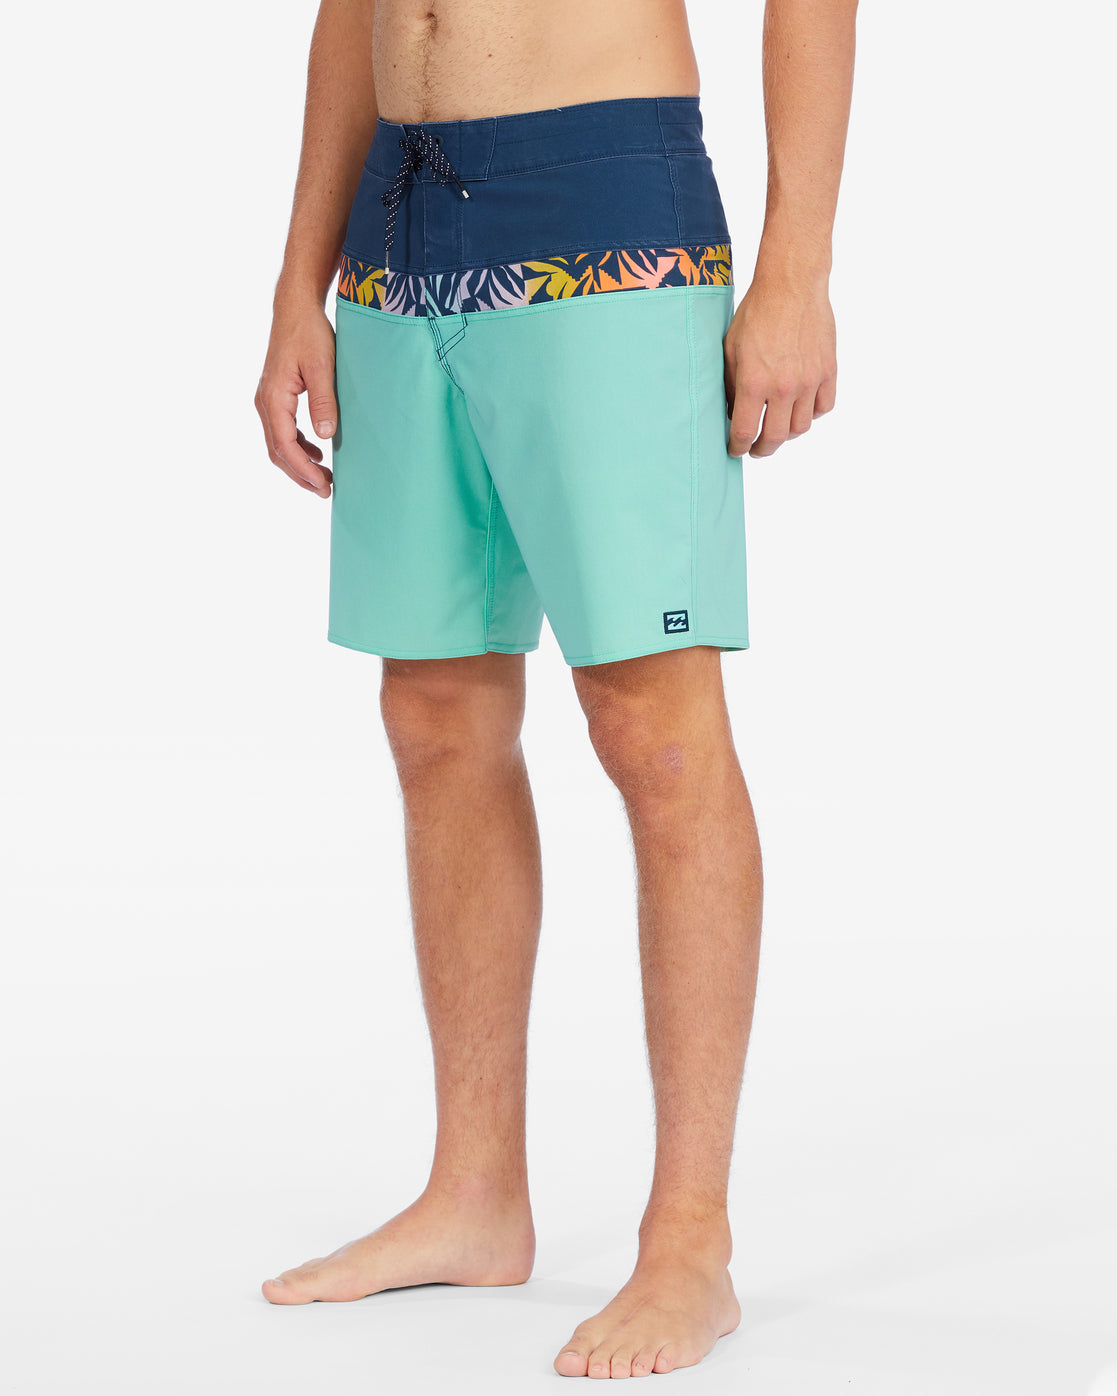 MENS MOMENTUM BOARDSHORTS - ABYBS00327